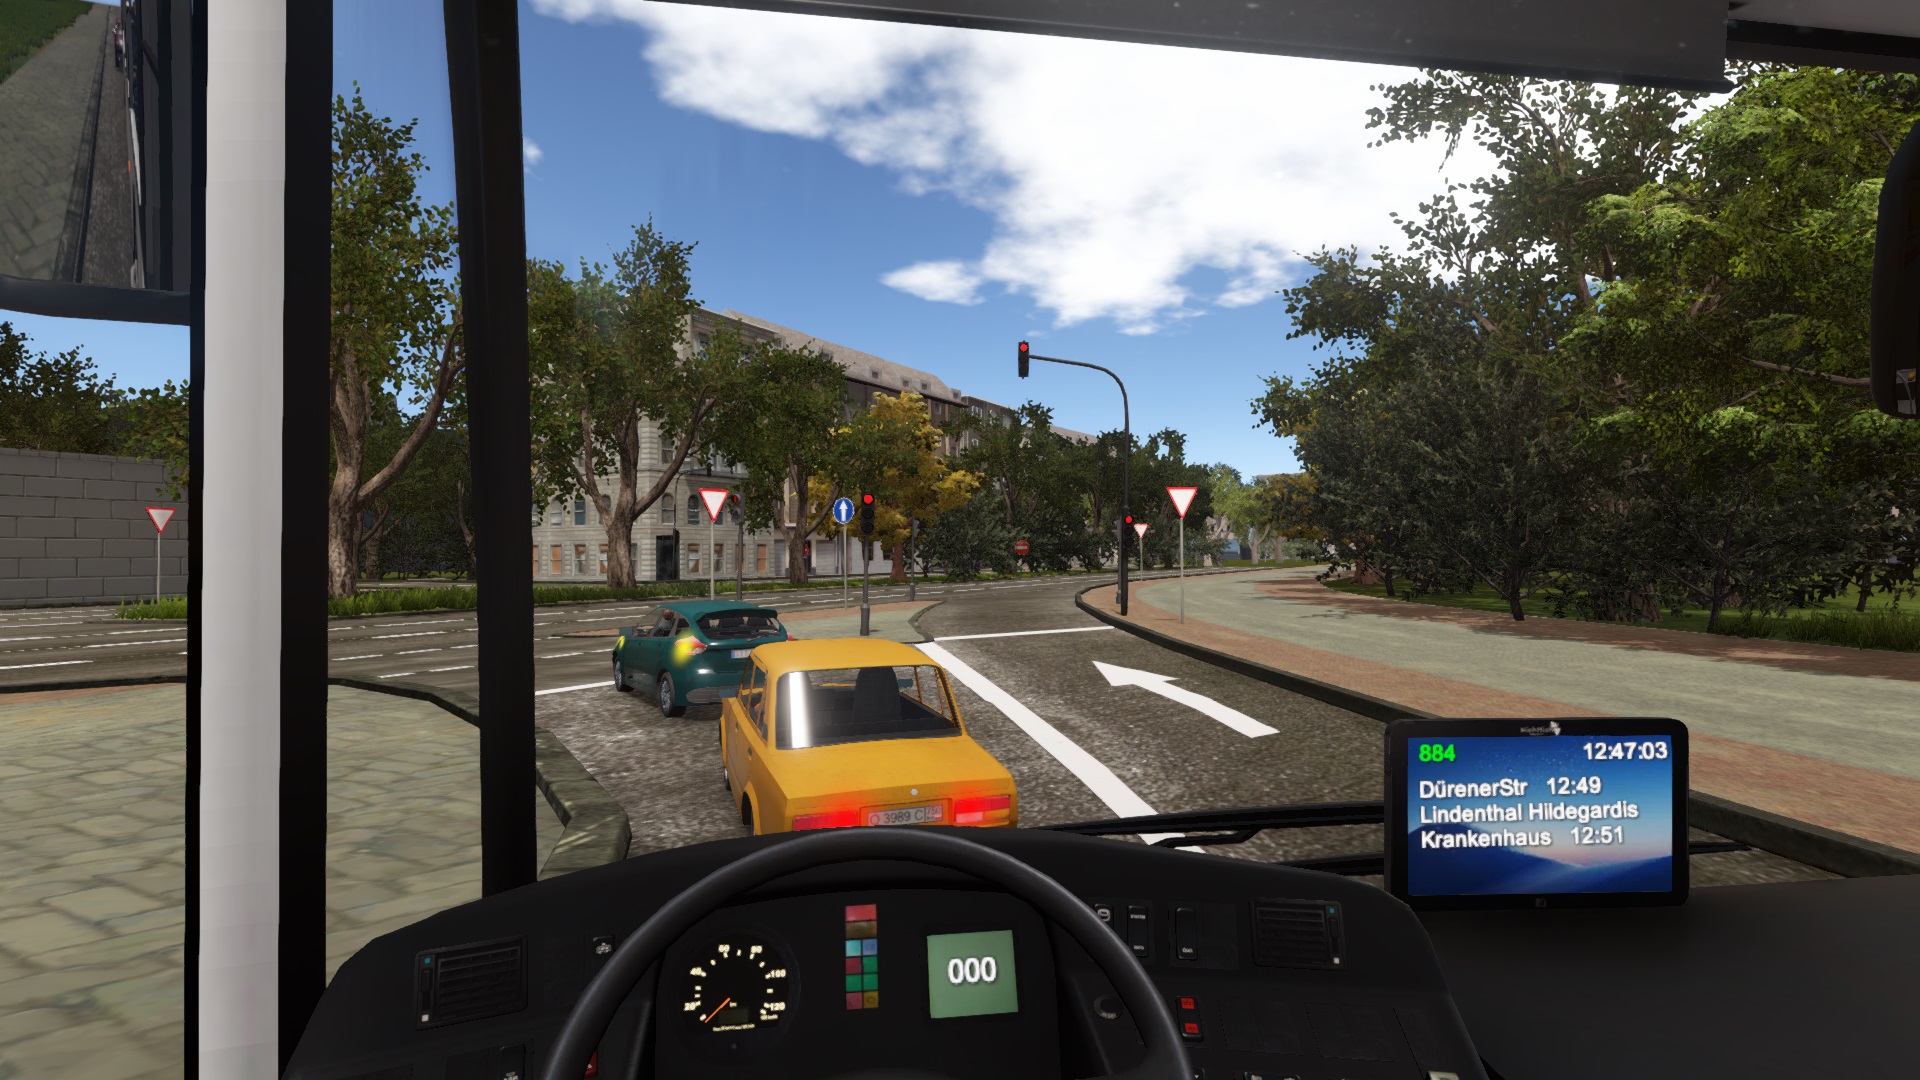 bus driver simulator 2018 system requirements